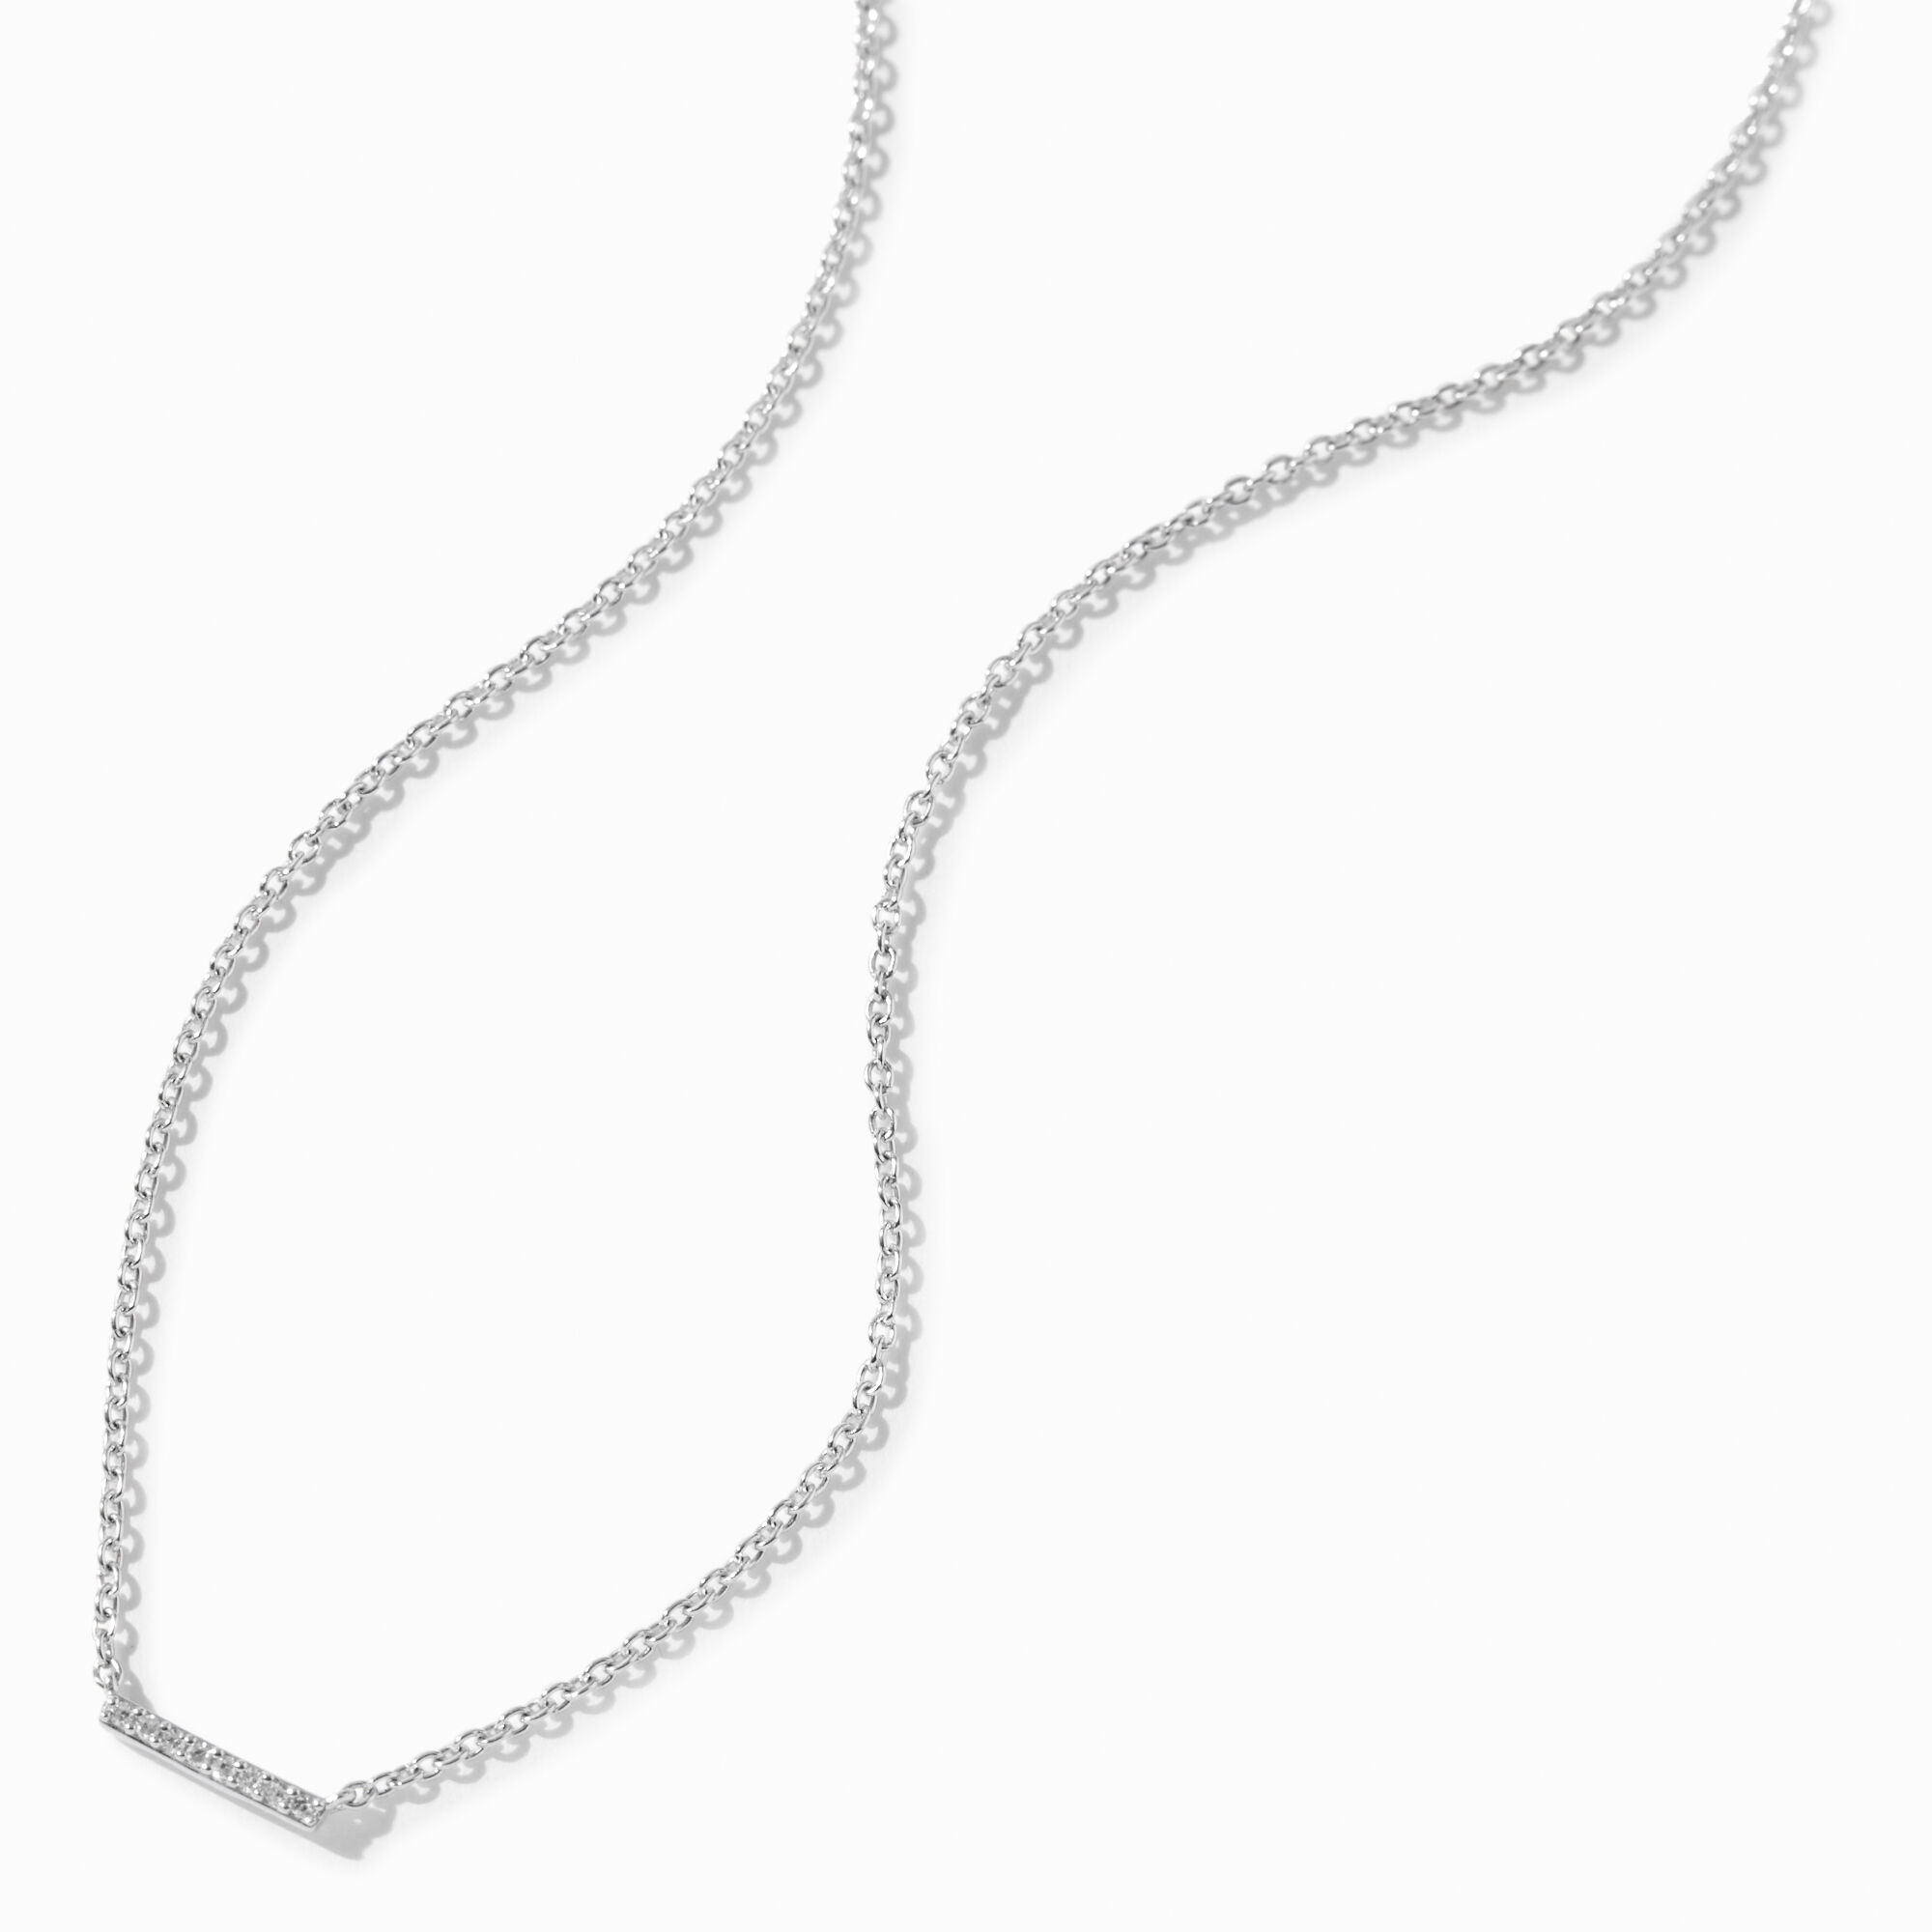 View C Luxe By Claires 120 Ct Tw Pavé Laboratory Grown Diamond Bar Pendant Necklace Silver information